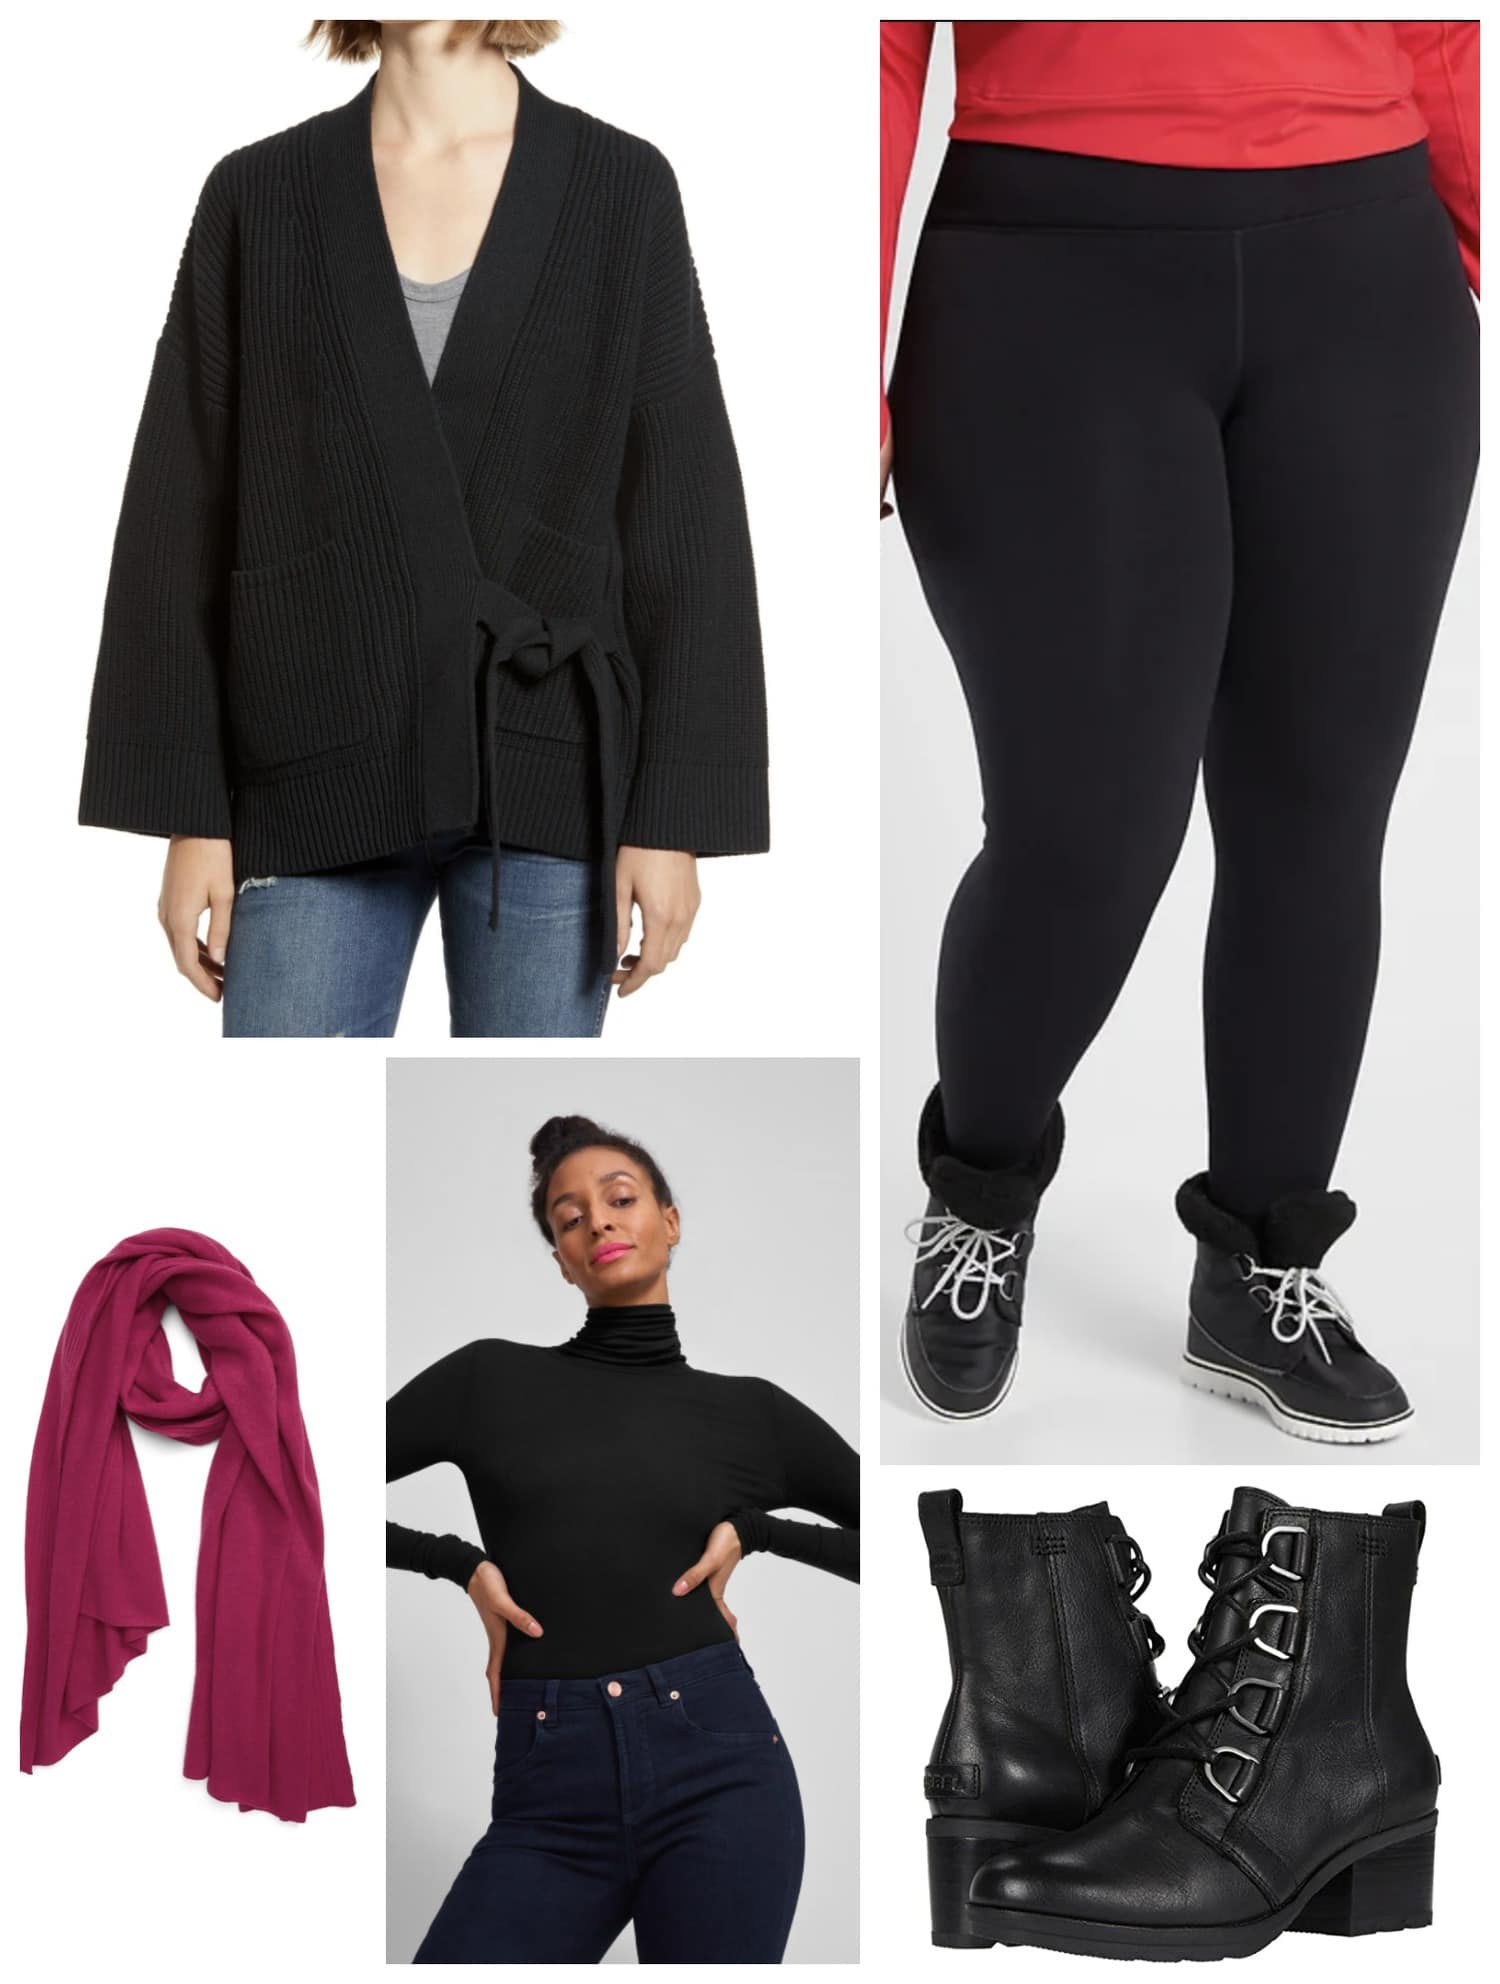 Not-so-basic all-black outfit with a pop of color from a berry colored pashmina